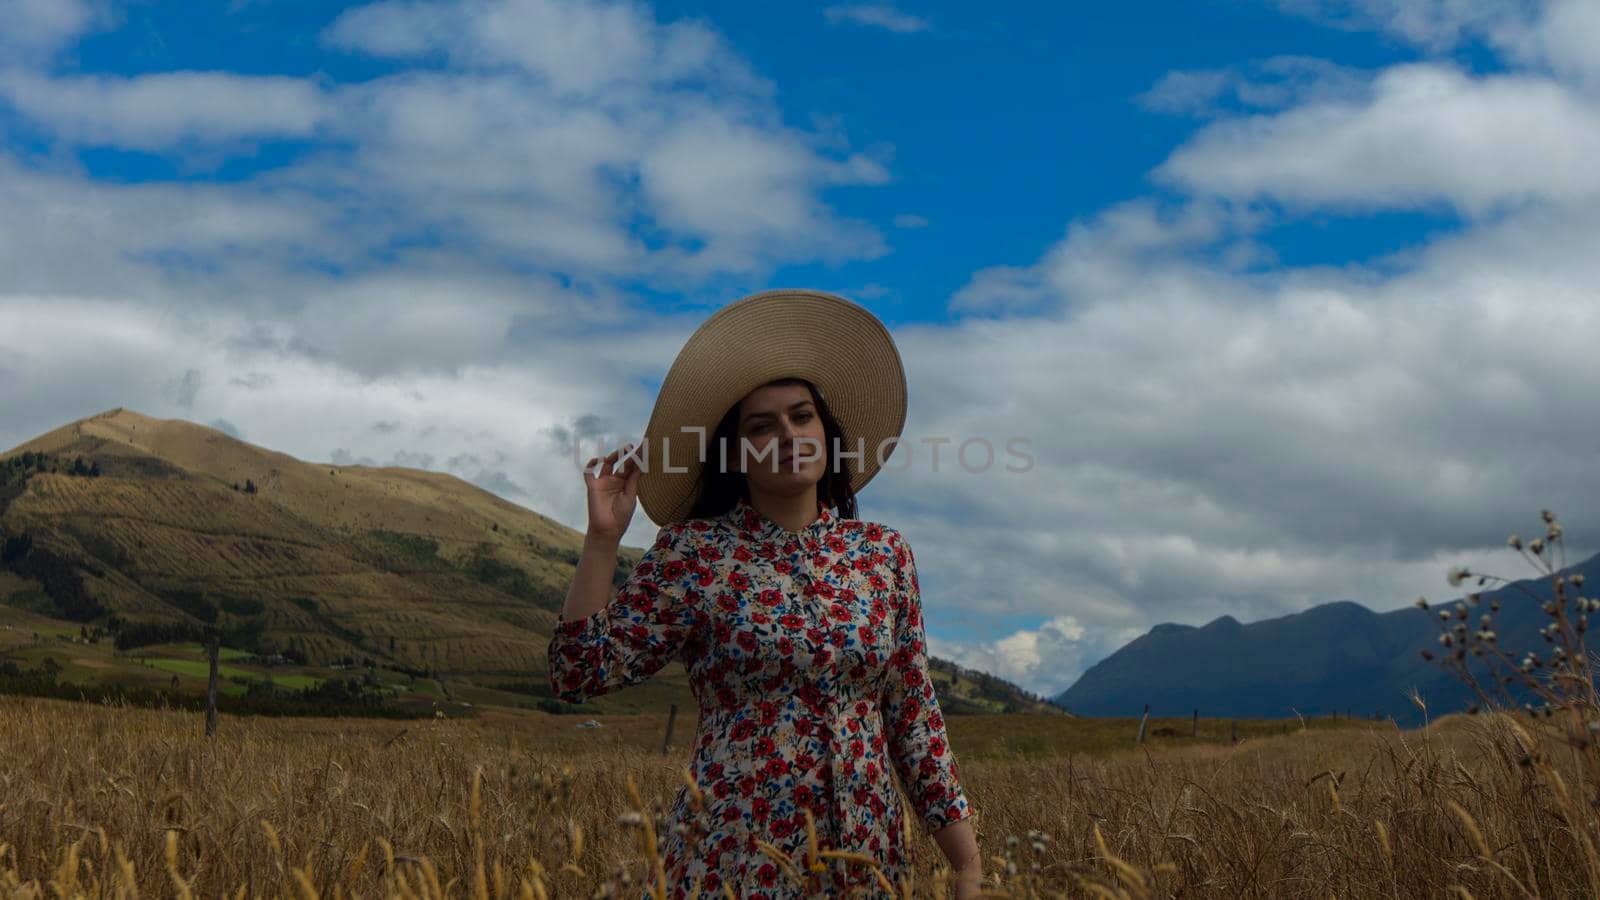 Happy young woman in floral dress holding her hat with her right hand walking alone in the middle of a wheat field seen from the front on a cloudy day with blue sky and mountains in the background